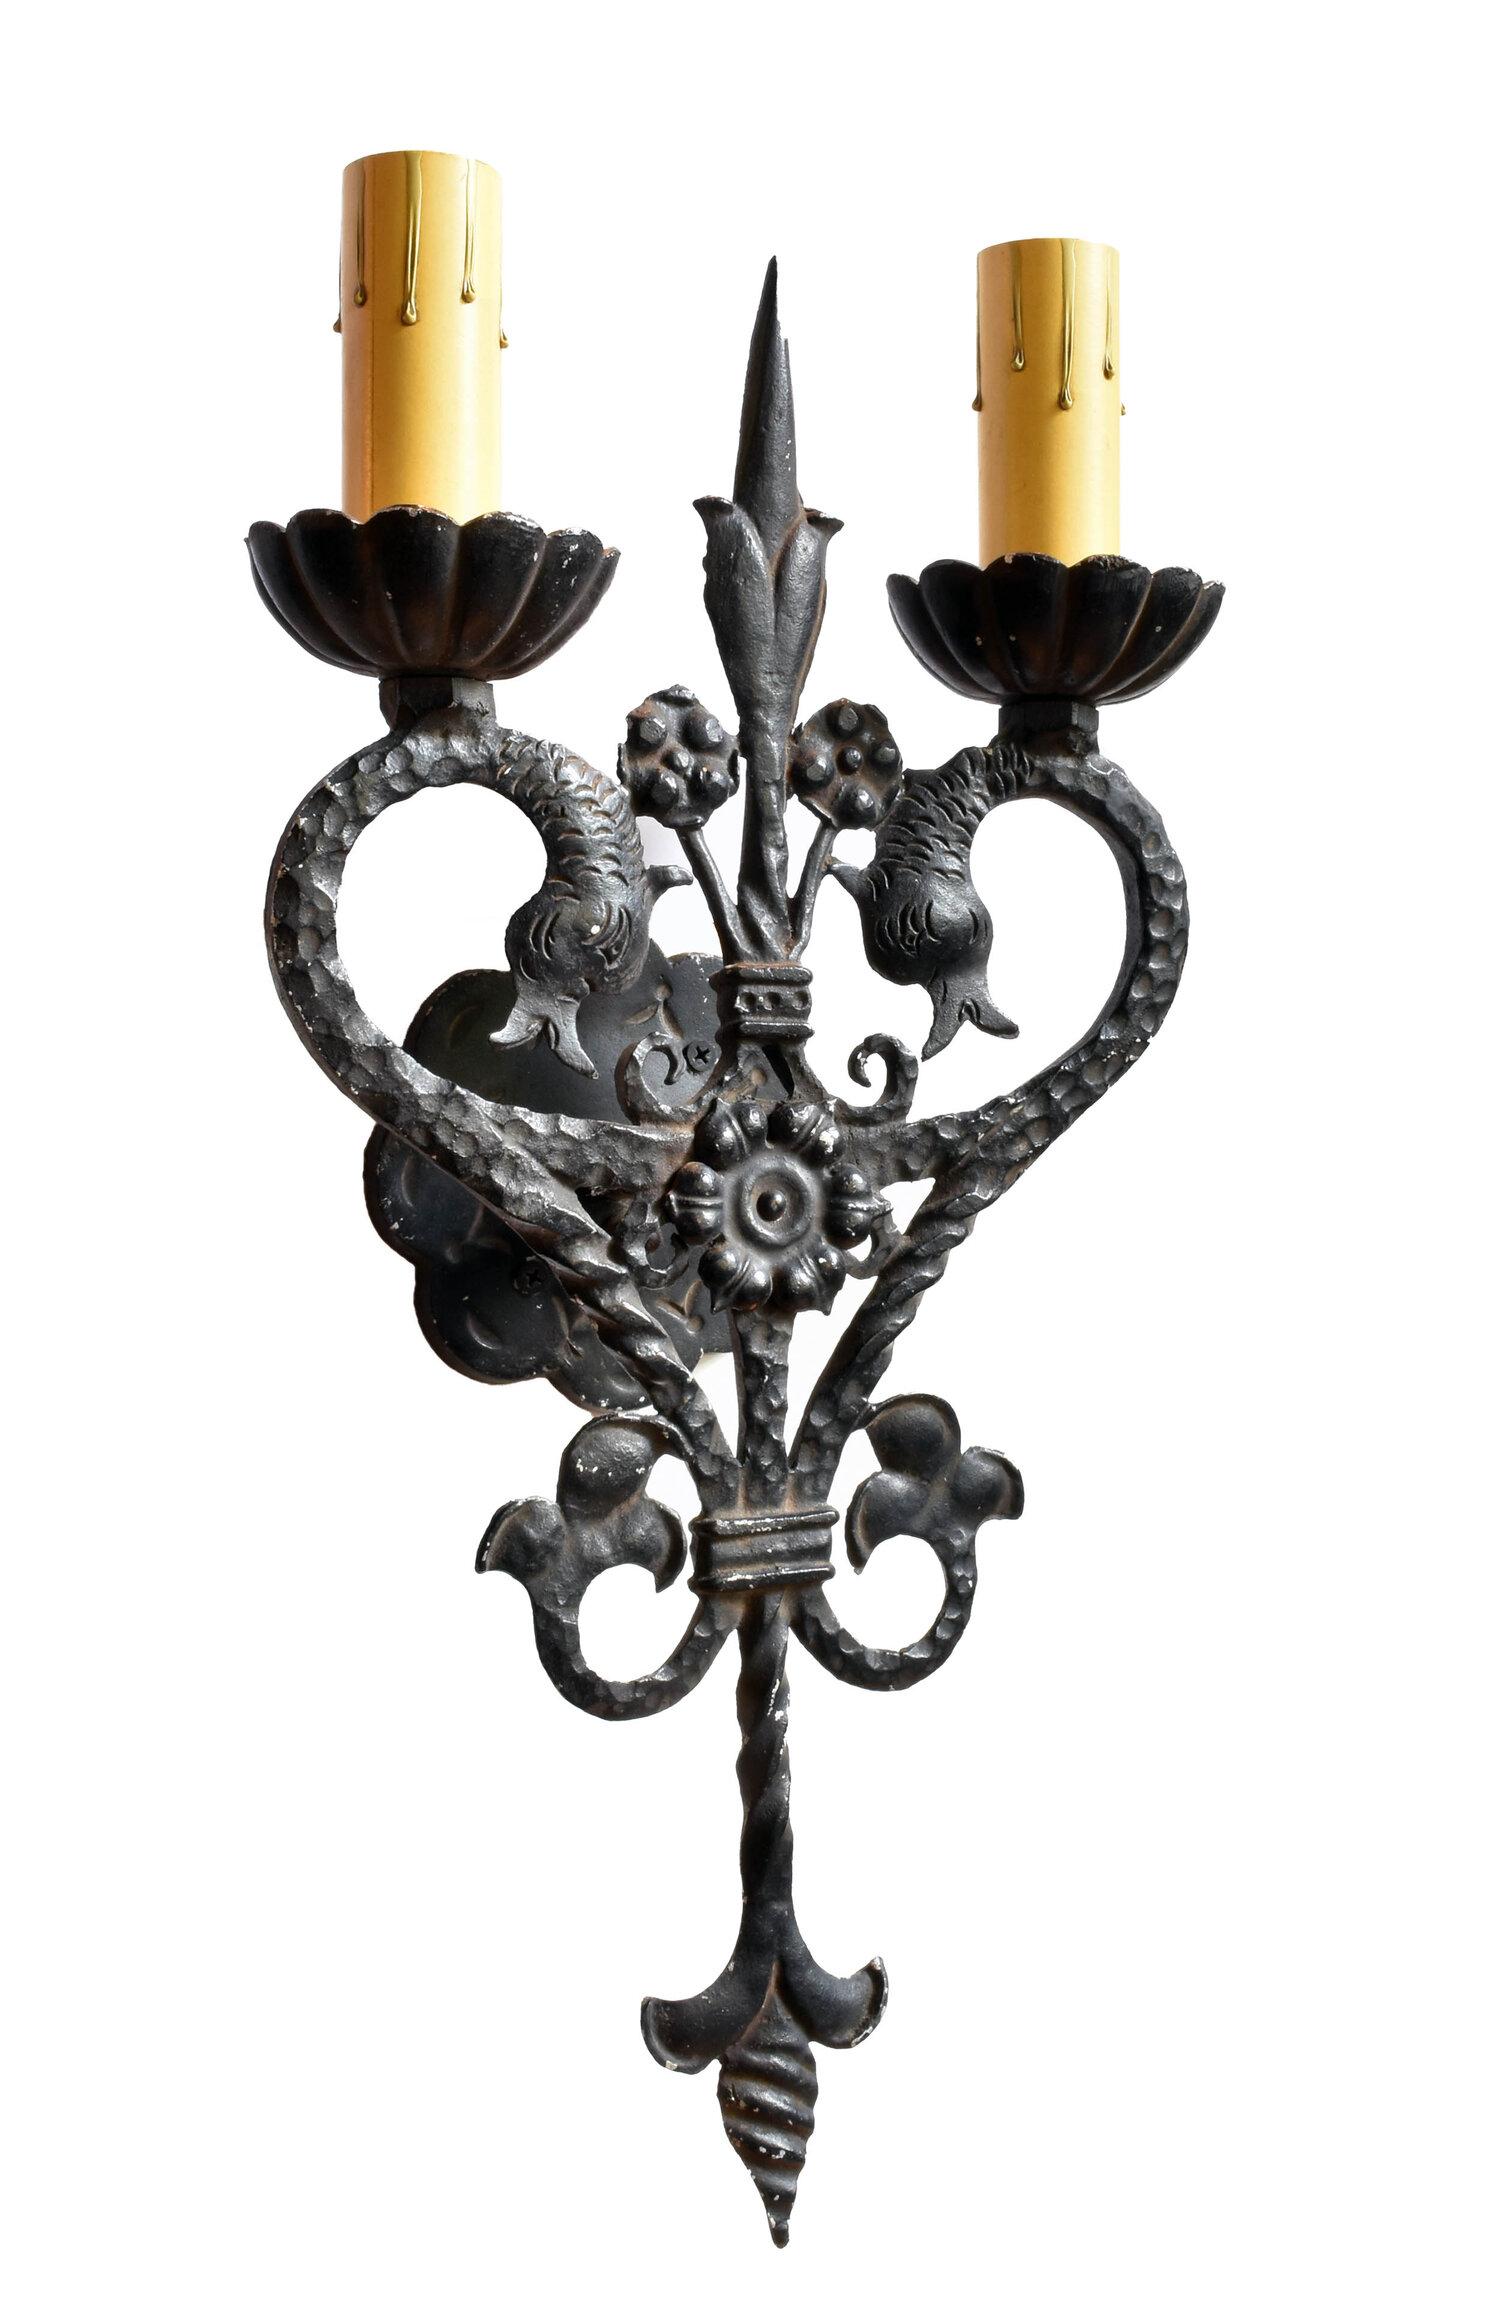 Intricate Mission Revival sconces featuring two feathered serpents. Petaled bobeche’s and sharp floral elements are present throughout these hammered and twisted aluminium sconces. 
Stamped on the back “CARLTON FDRY #600”

Illumination: 2